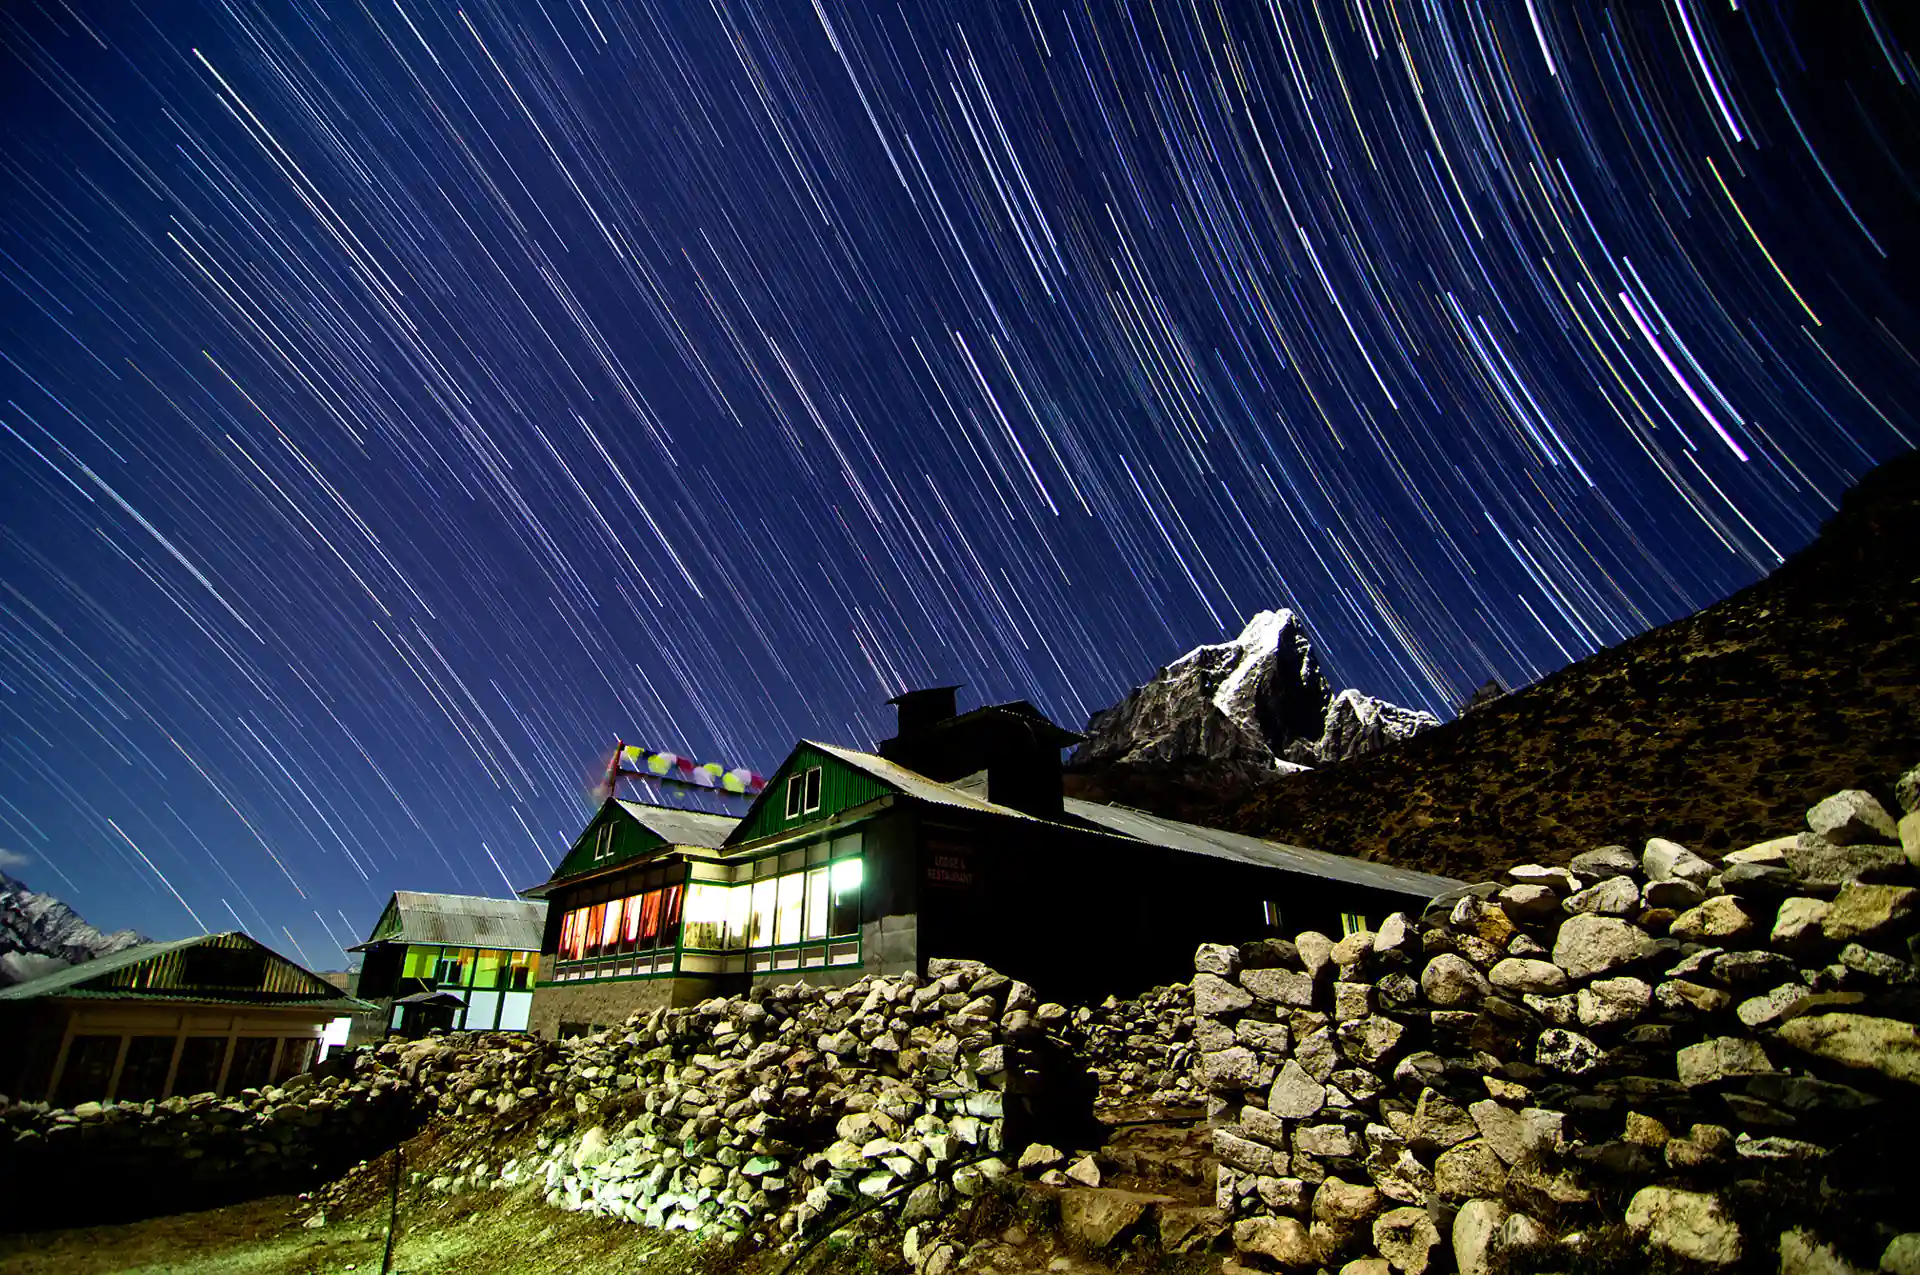 Star trails at Dingboche